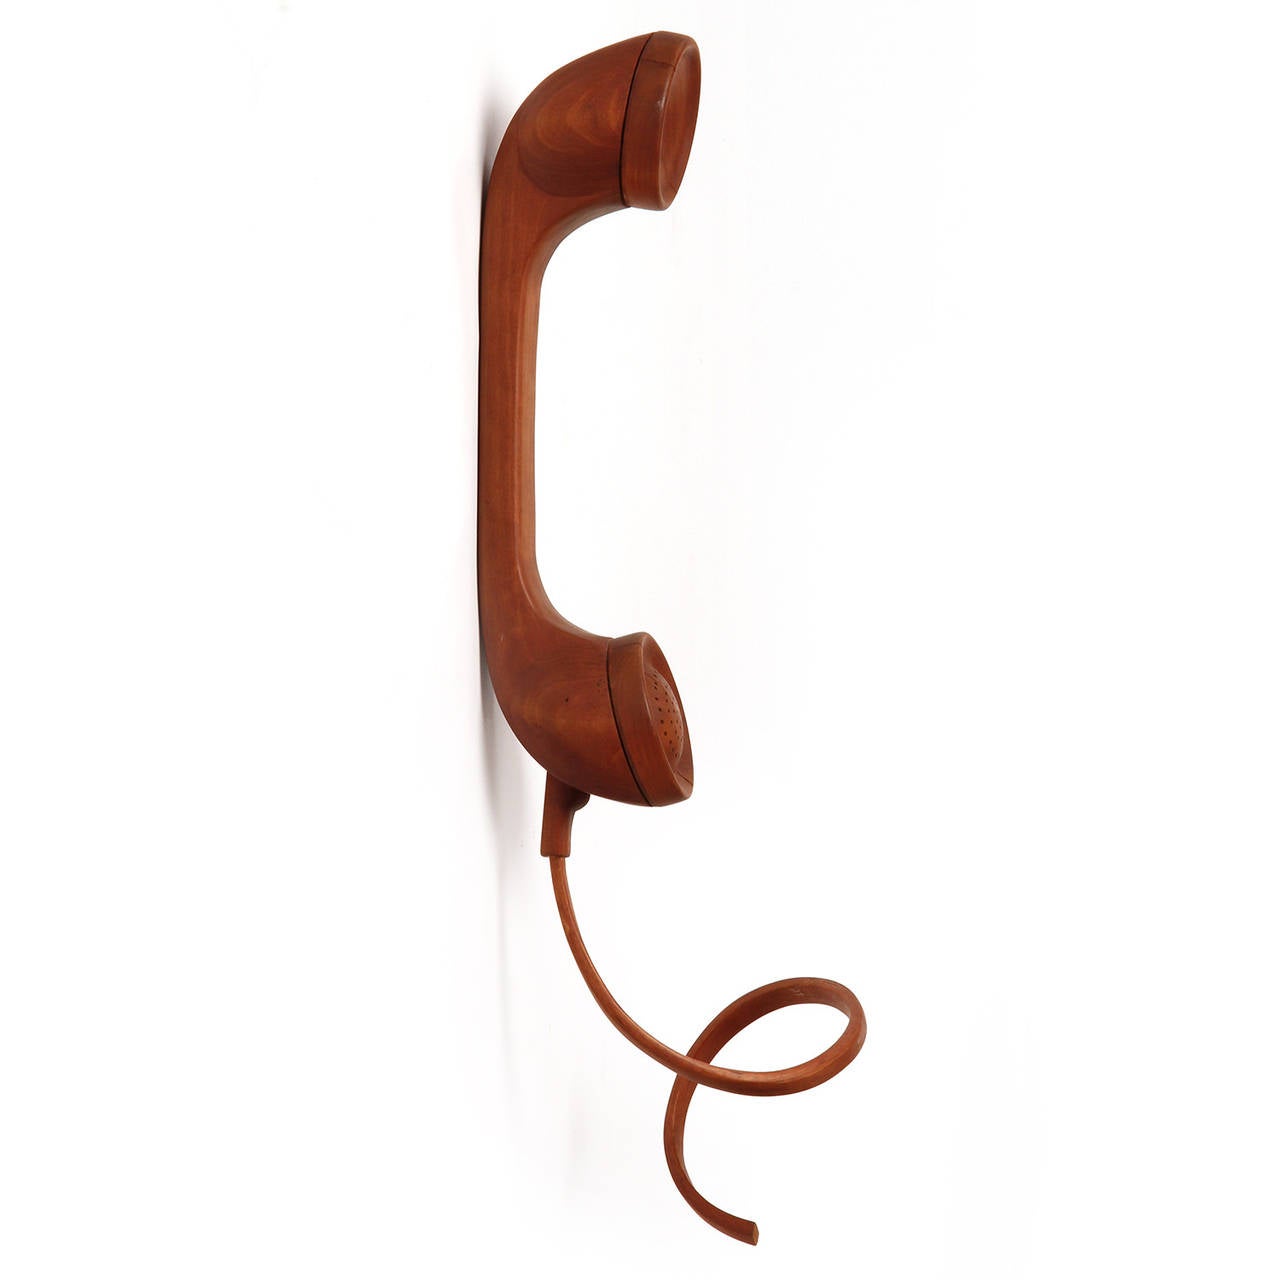 An amazing large-scaled wall-mounted Pop Art sculpture of a telephone with cord beautifully carved from a solid blank of wood.